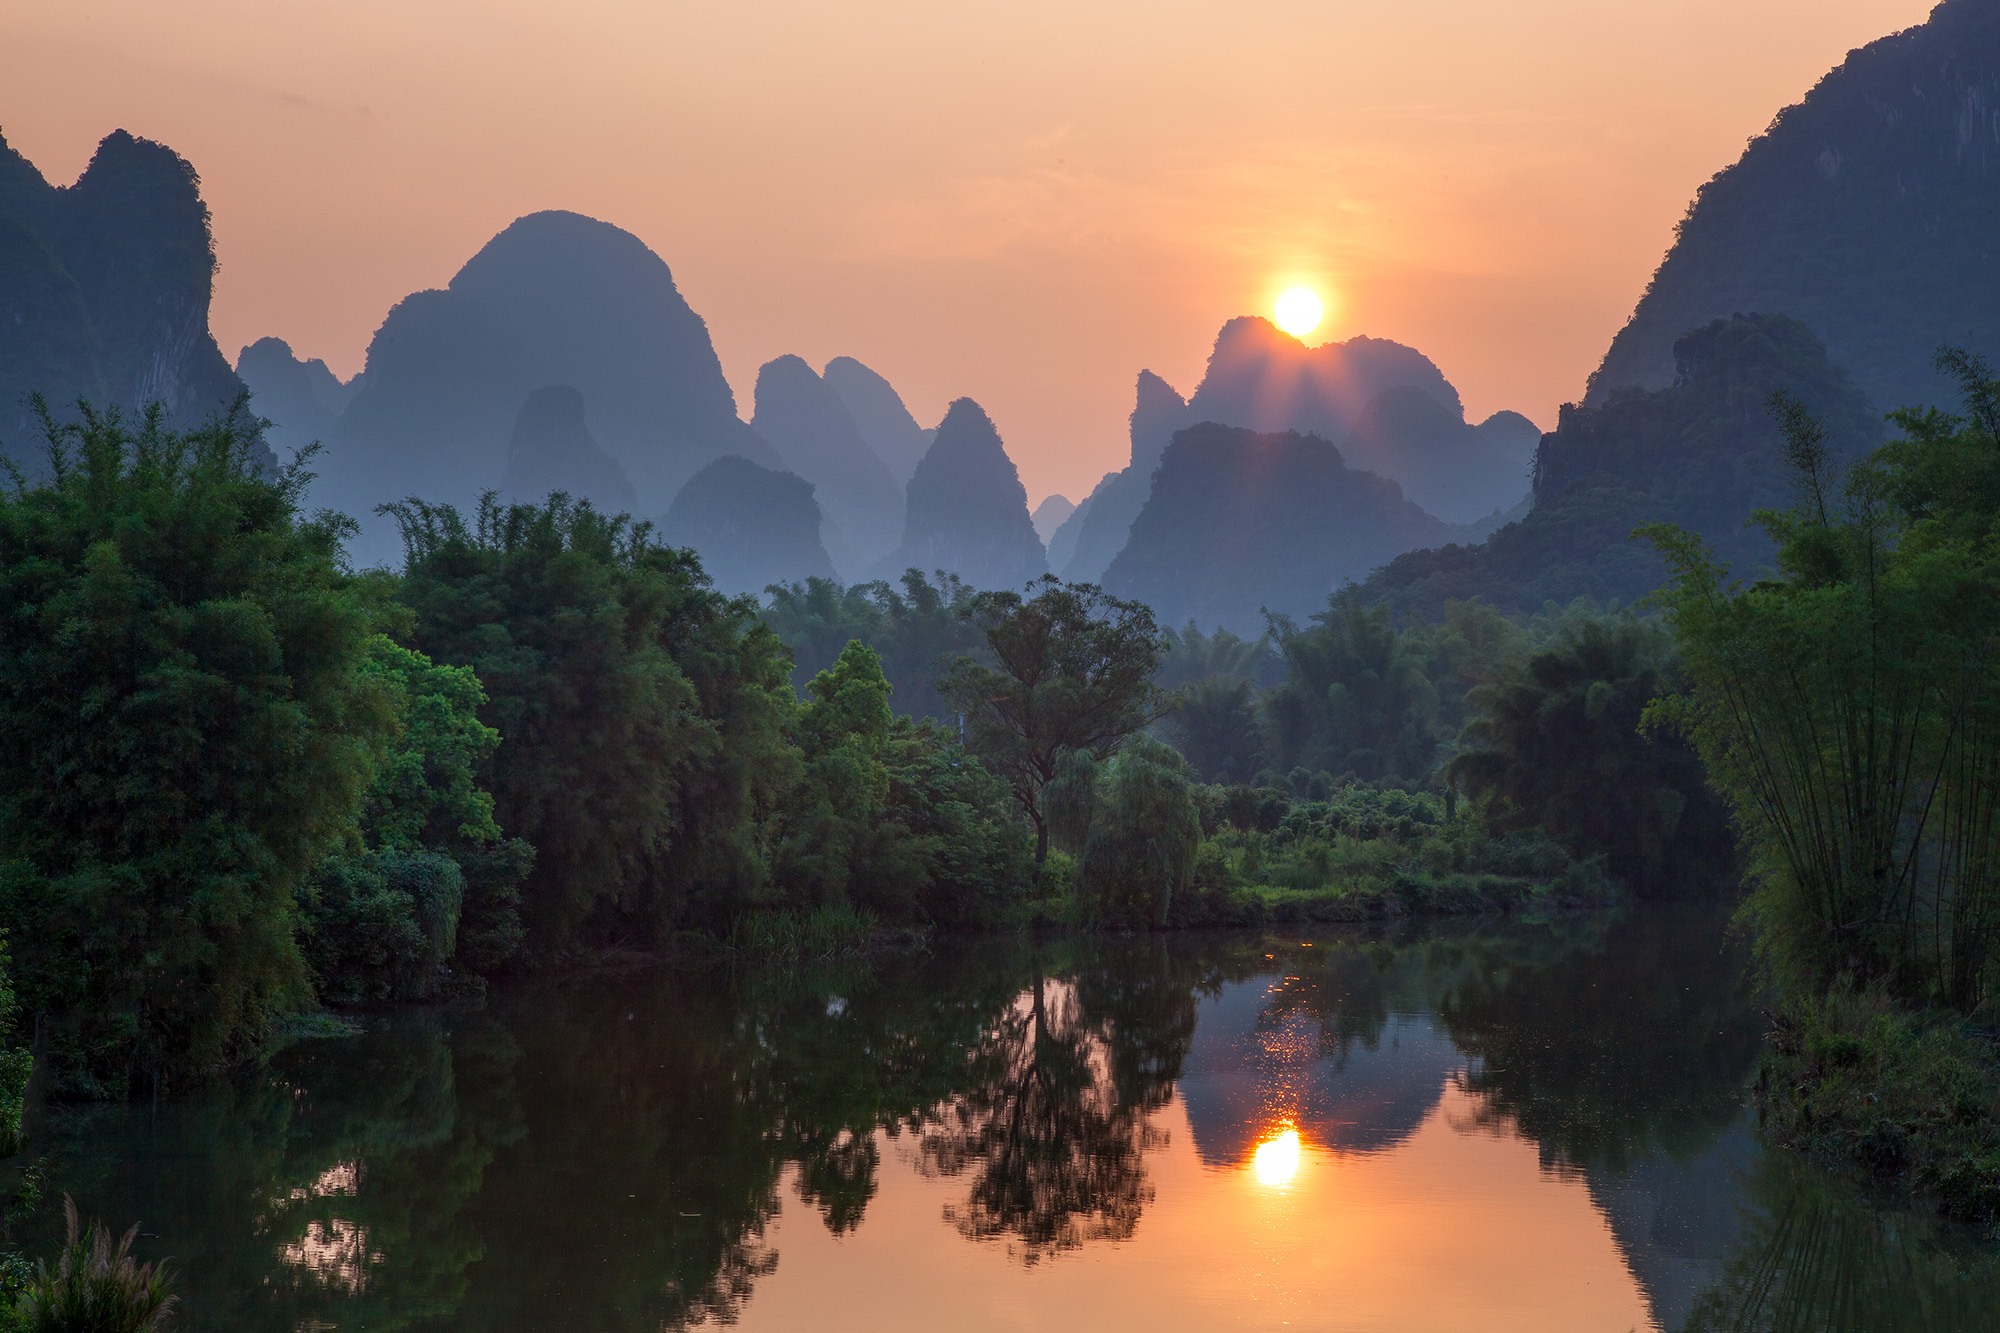 Lily and I scoured the Yangshuo area for the perfect sunset spot, the hot, humid air embracing us. As we ventured along the river...